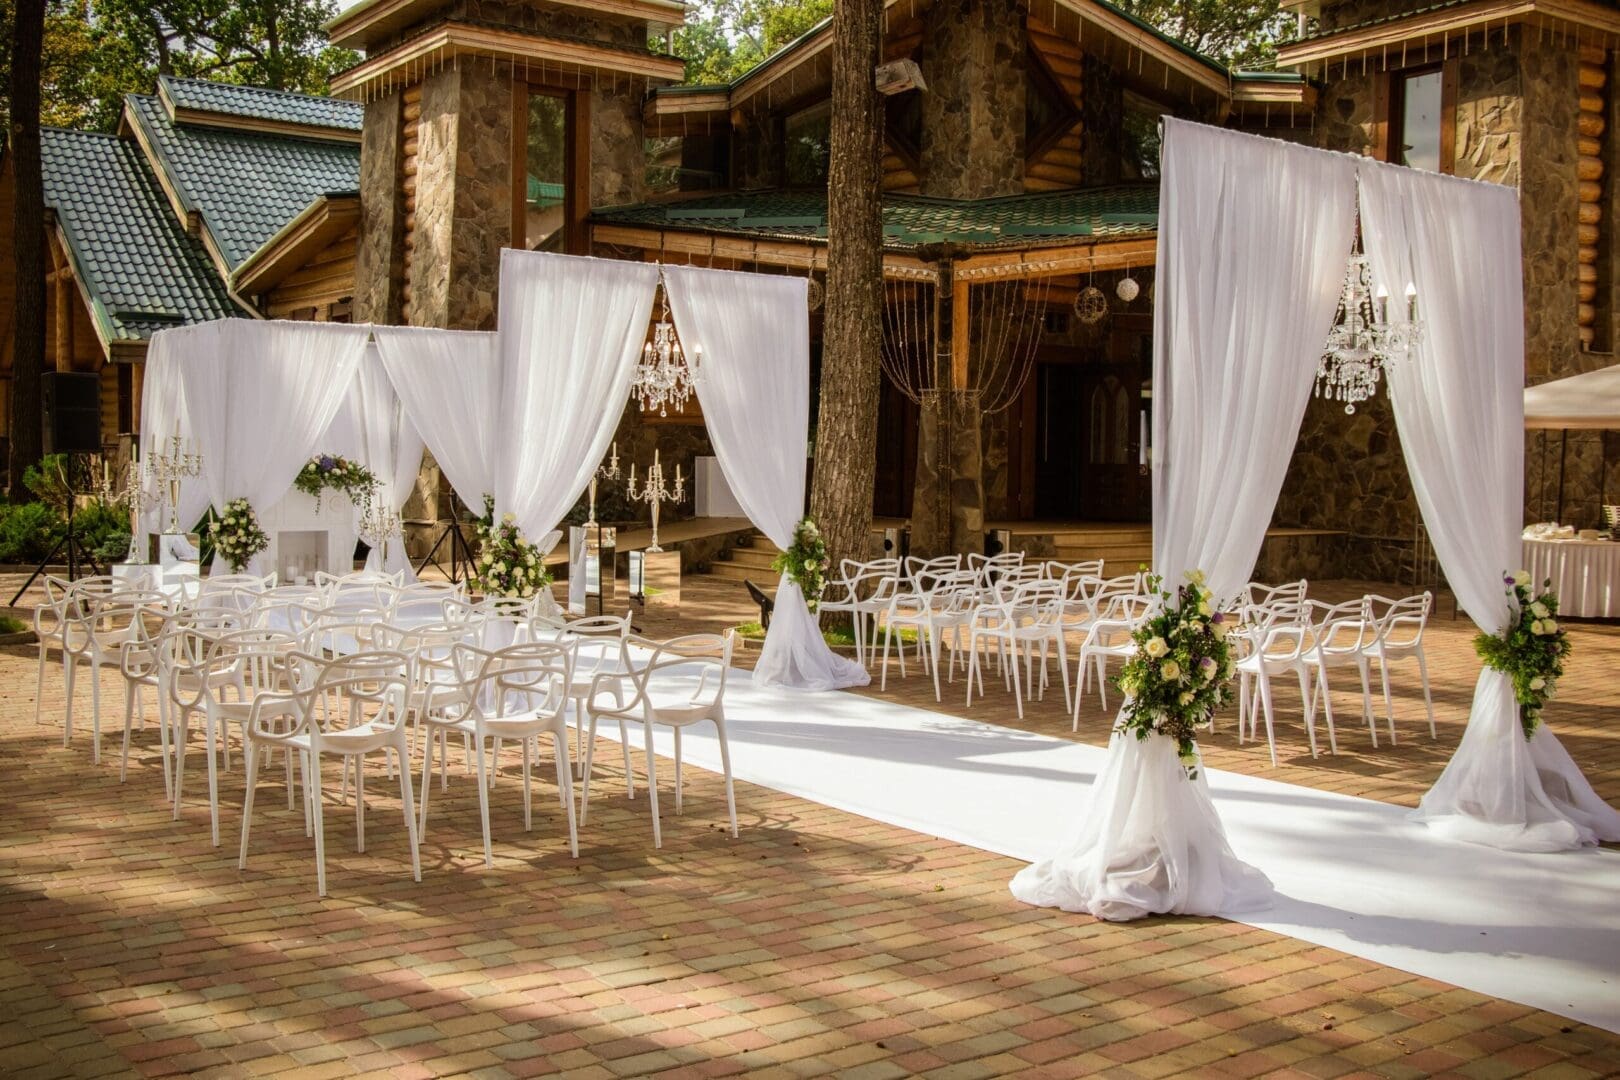 A wedding ceremony set up in a wooded area.